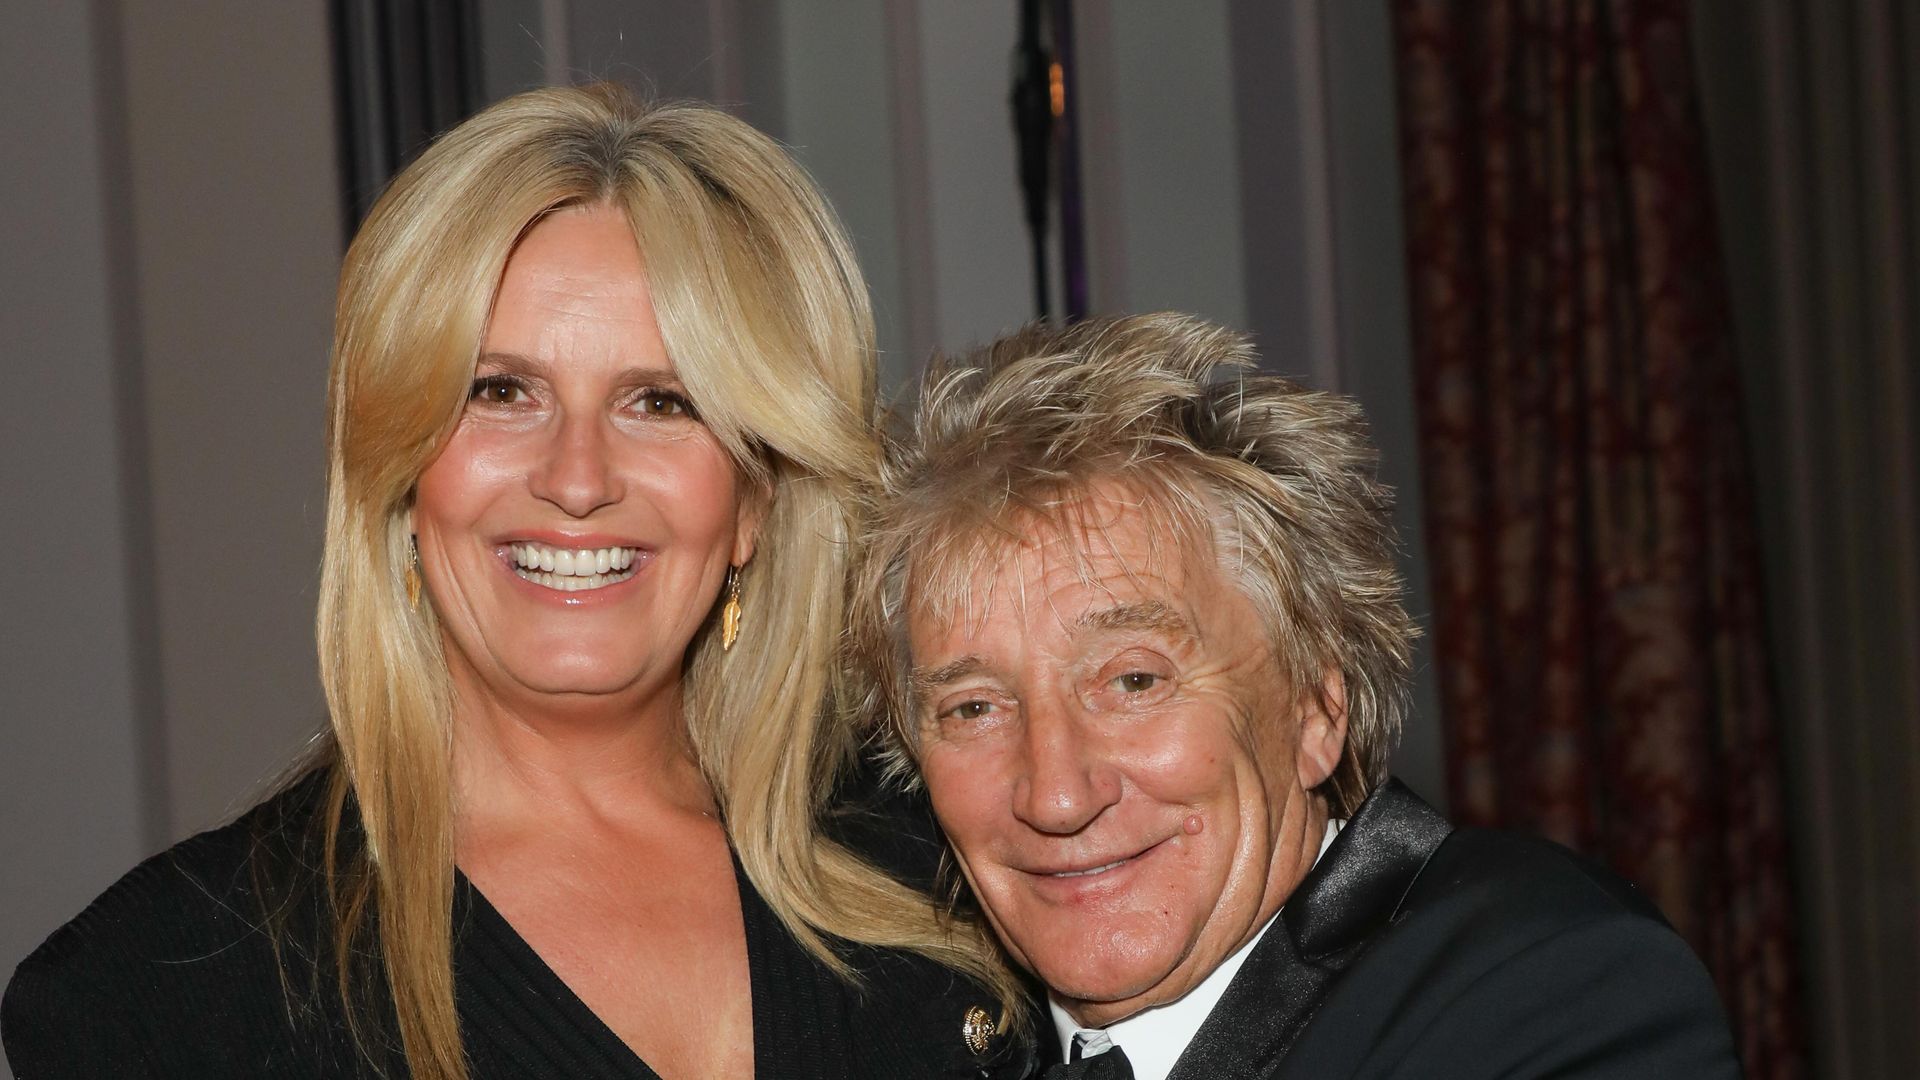 Penny Lancaster and Rod Stewart in black